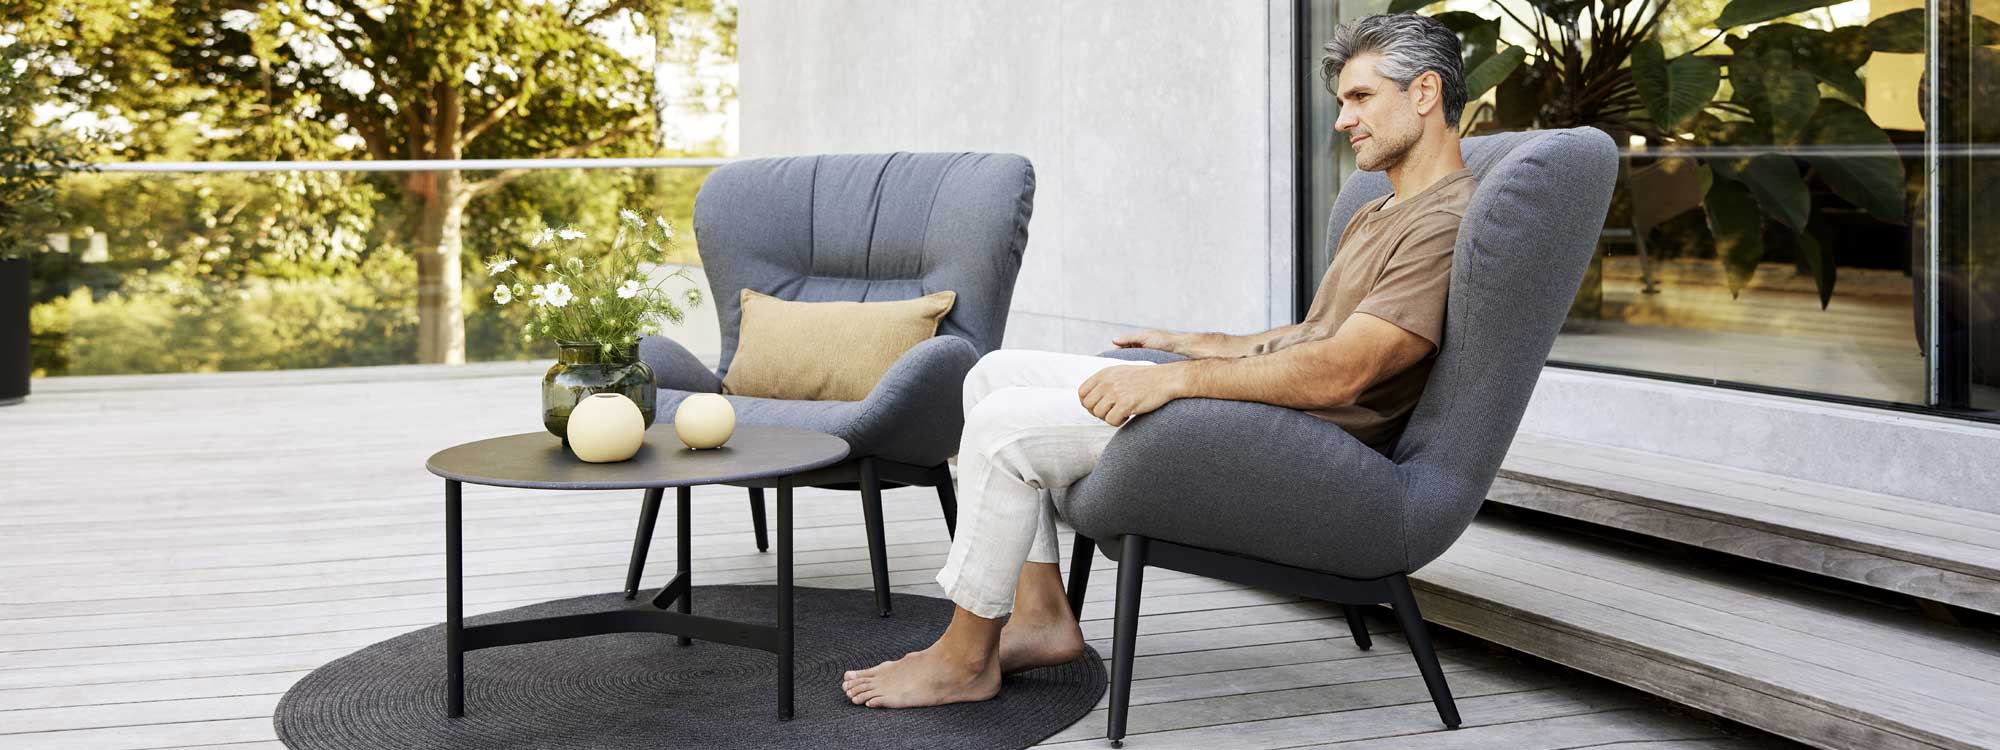 Image of man enjoying the comfort of Serene grey upholstered garden lounge chair by Cane-line